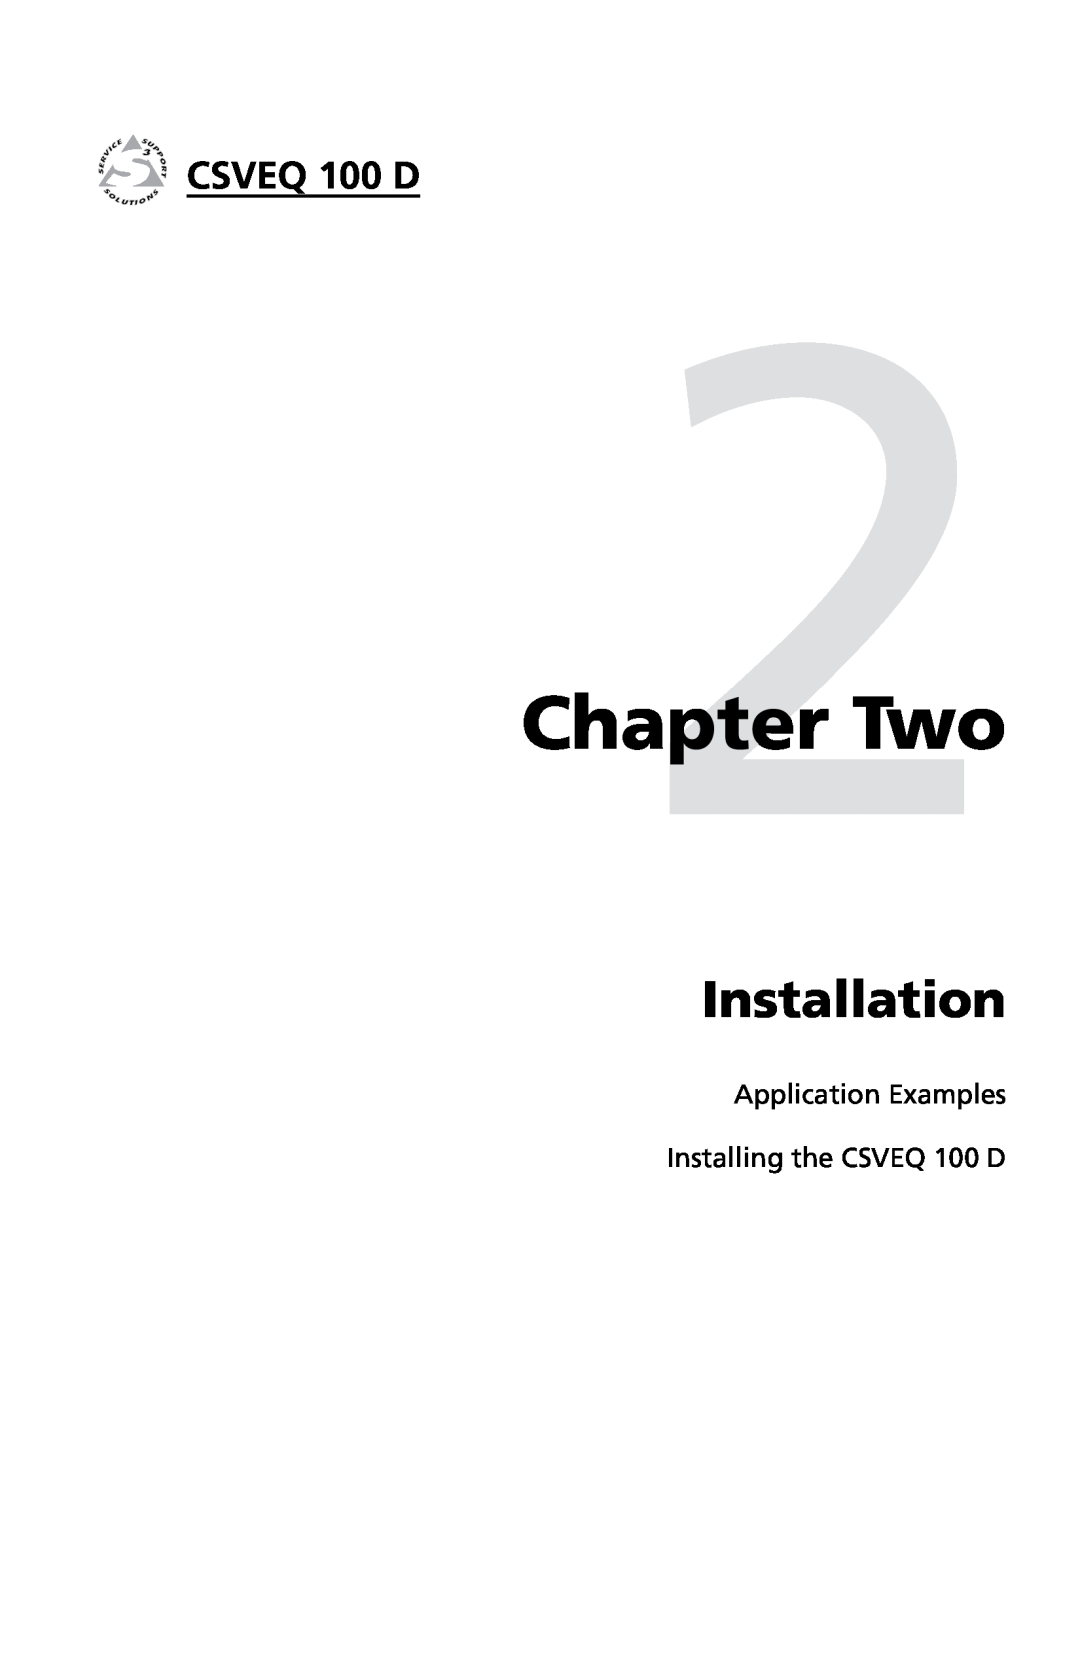 Extron electronic user manual Two, Installation, Application Examples Installing the CSVEQ 100 D 